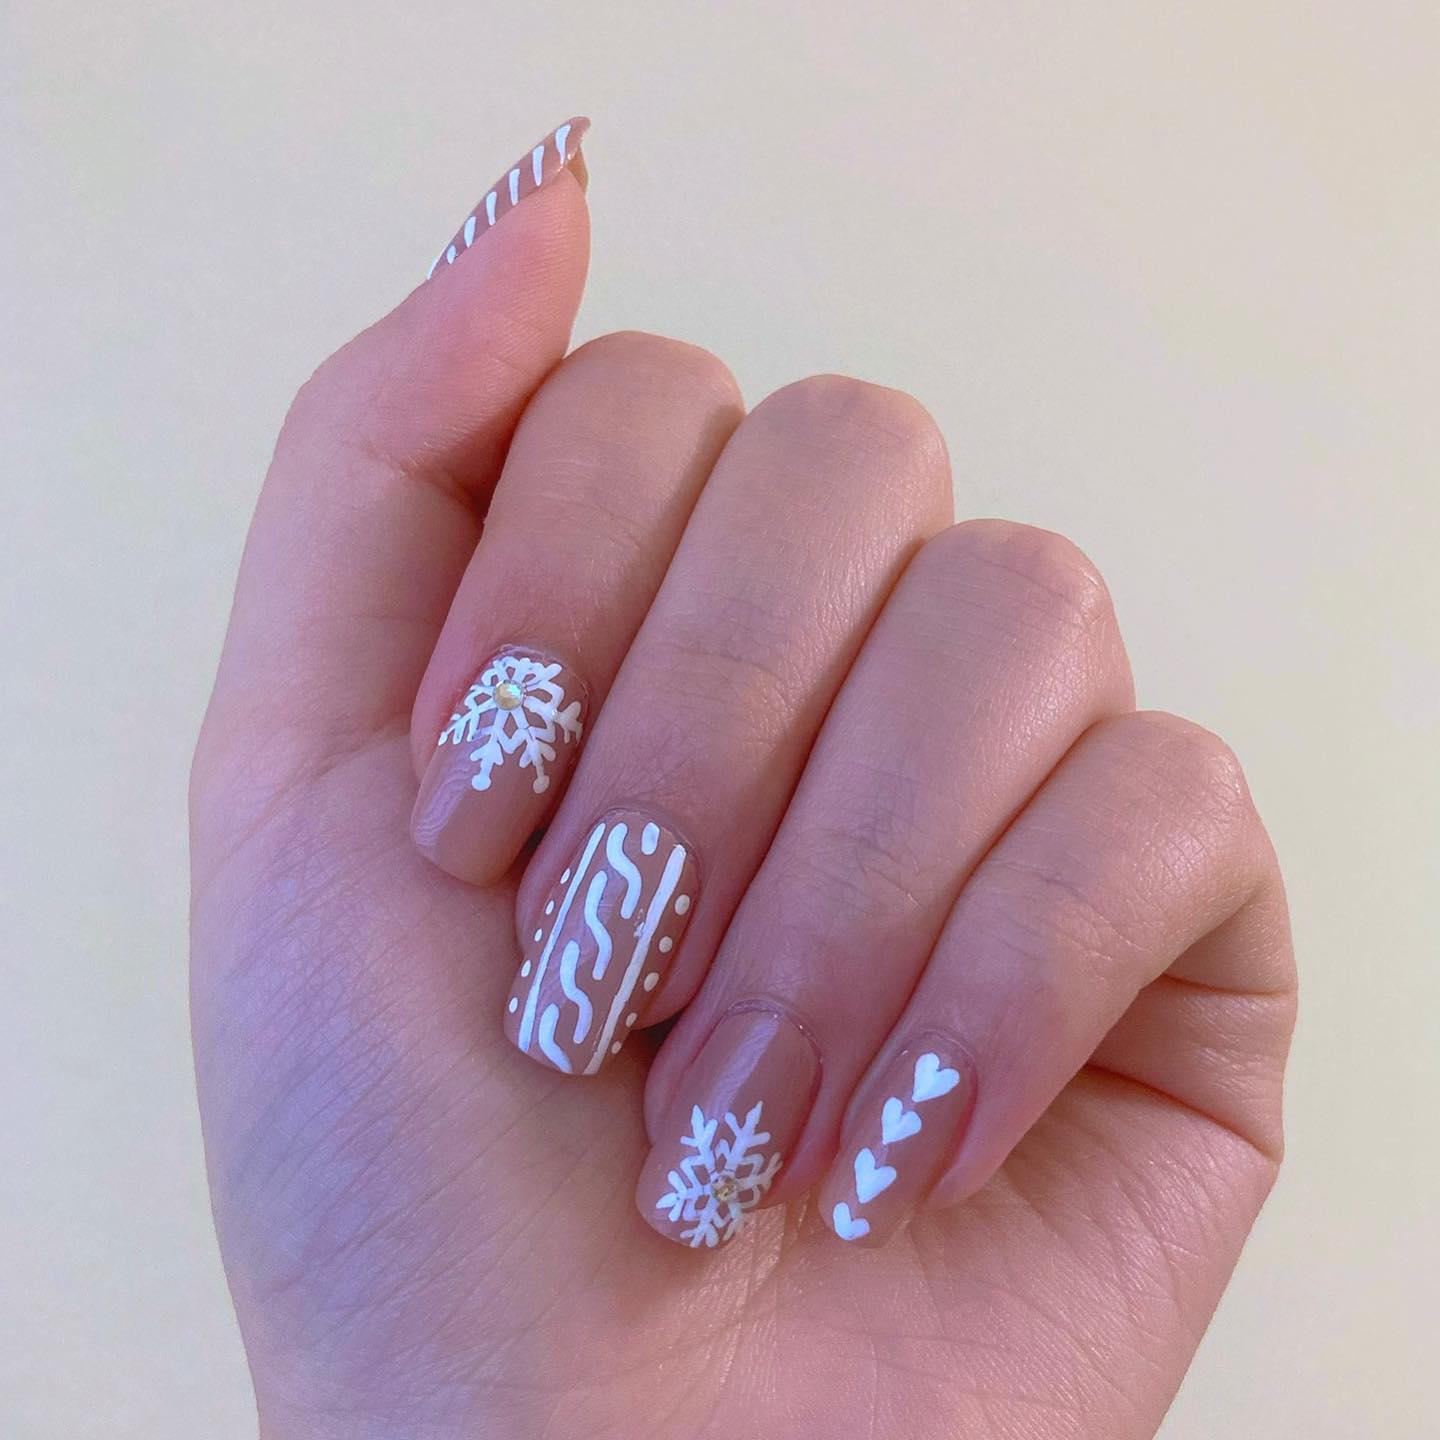 On top of your chic nude nails, why don't you draw some hearts, snowflakes and lines to give it a winter look?